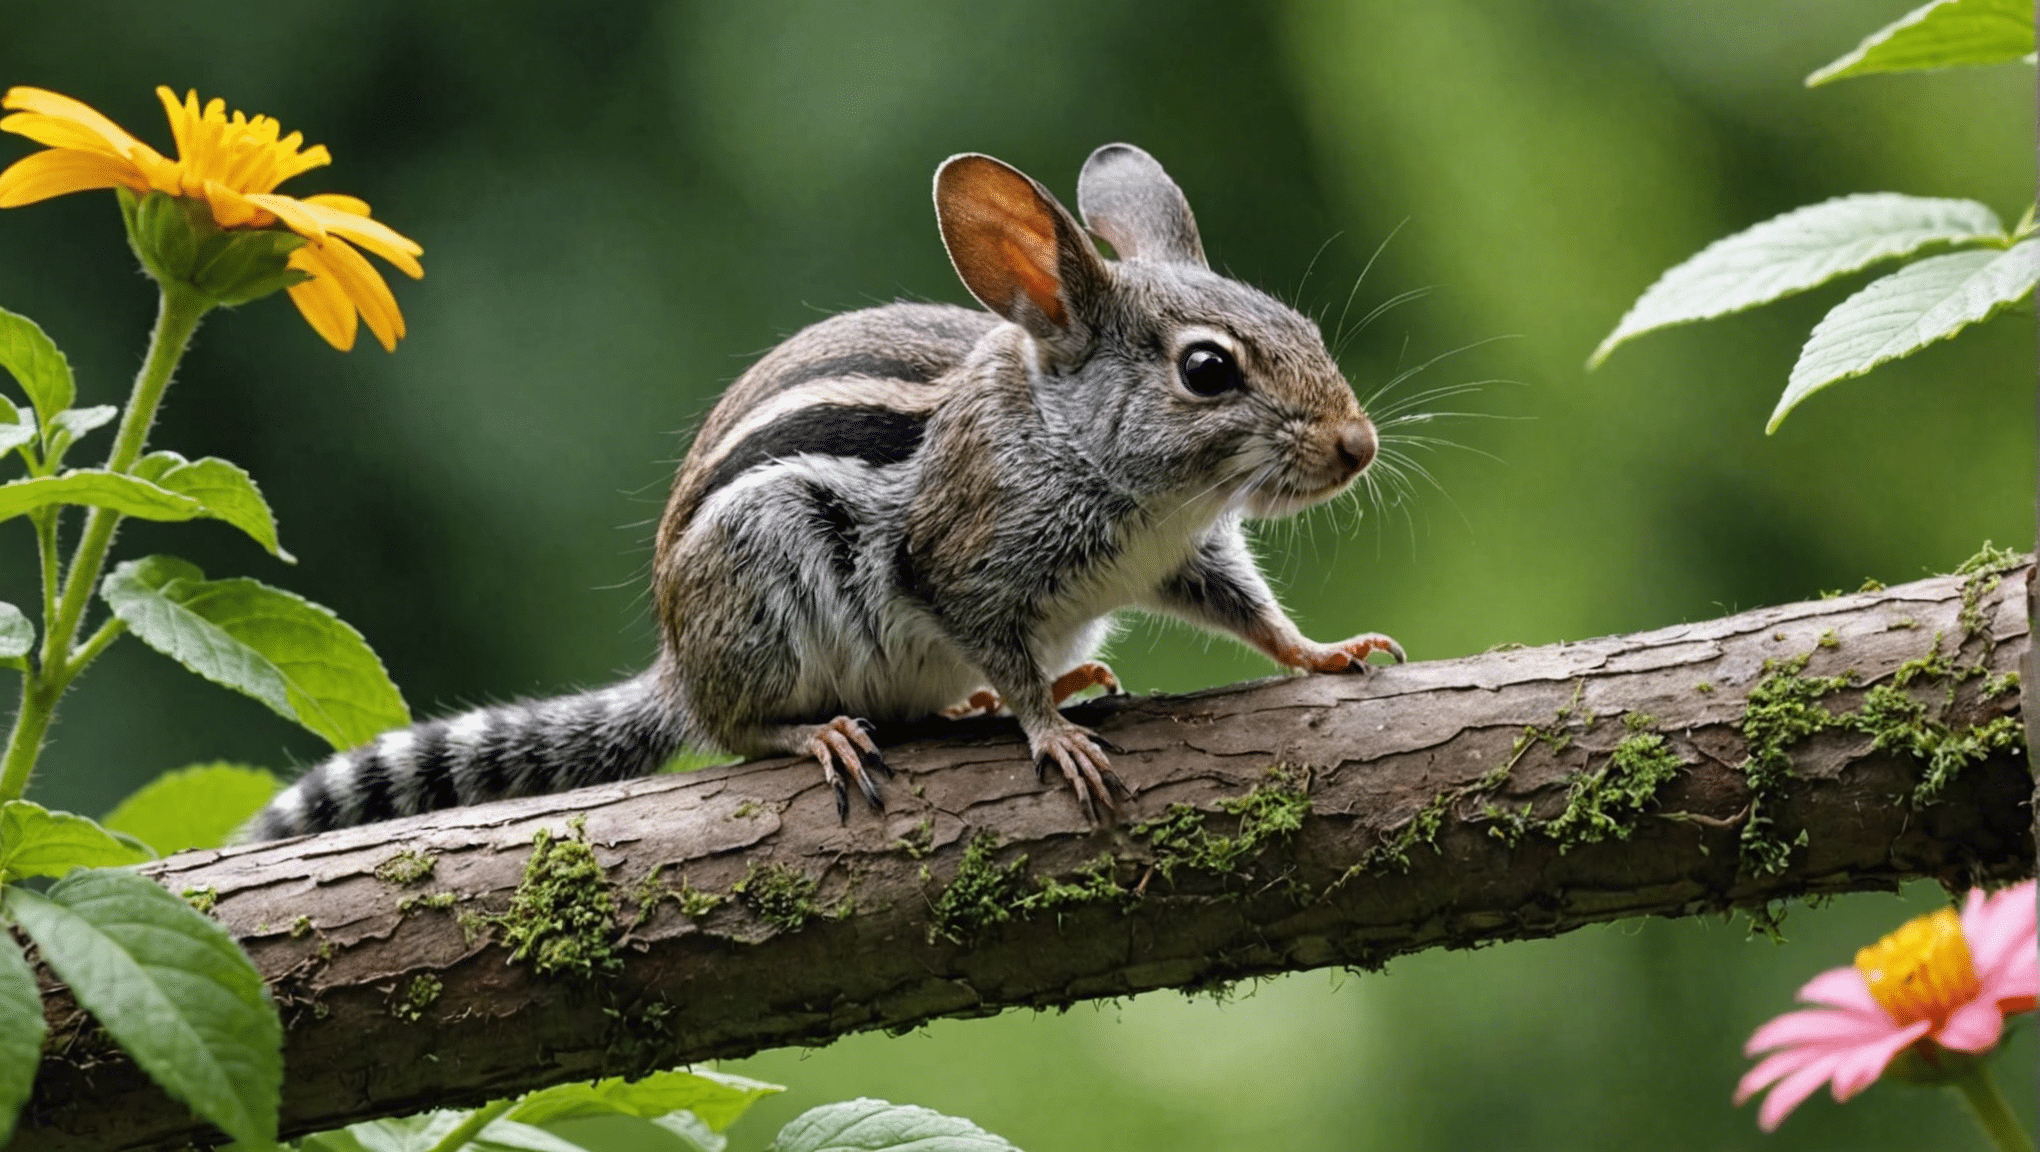 learn about backyard pests, animals, and their uses in this comprehensive guide to understanding wildlife in your backyard.